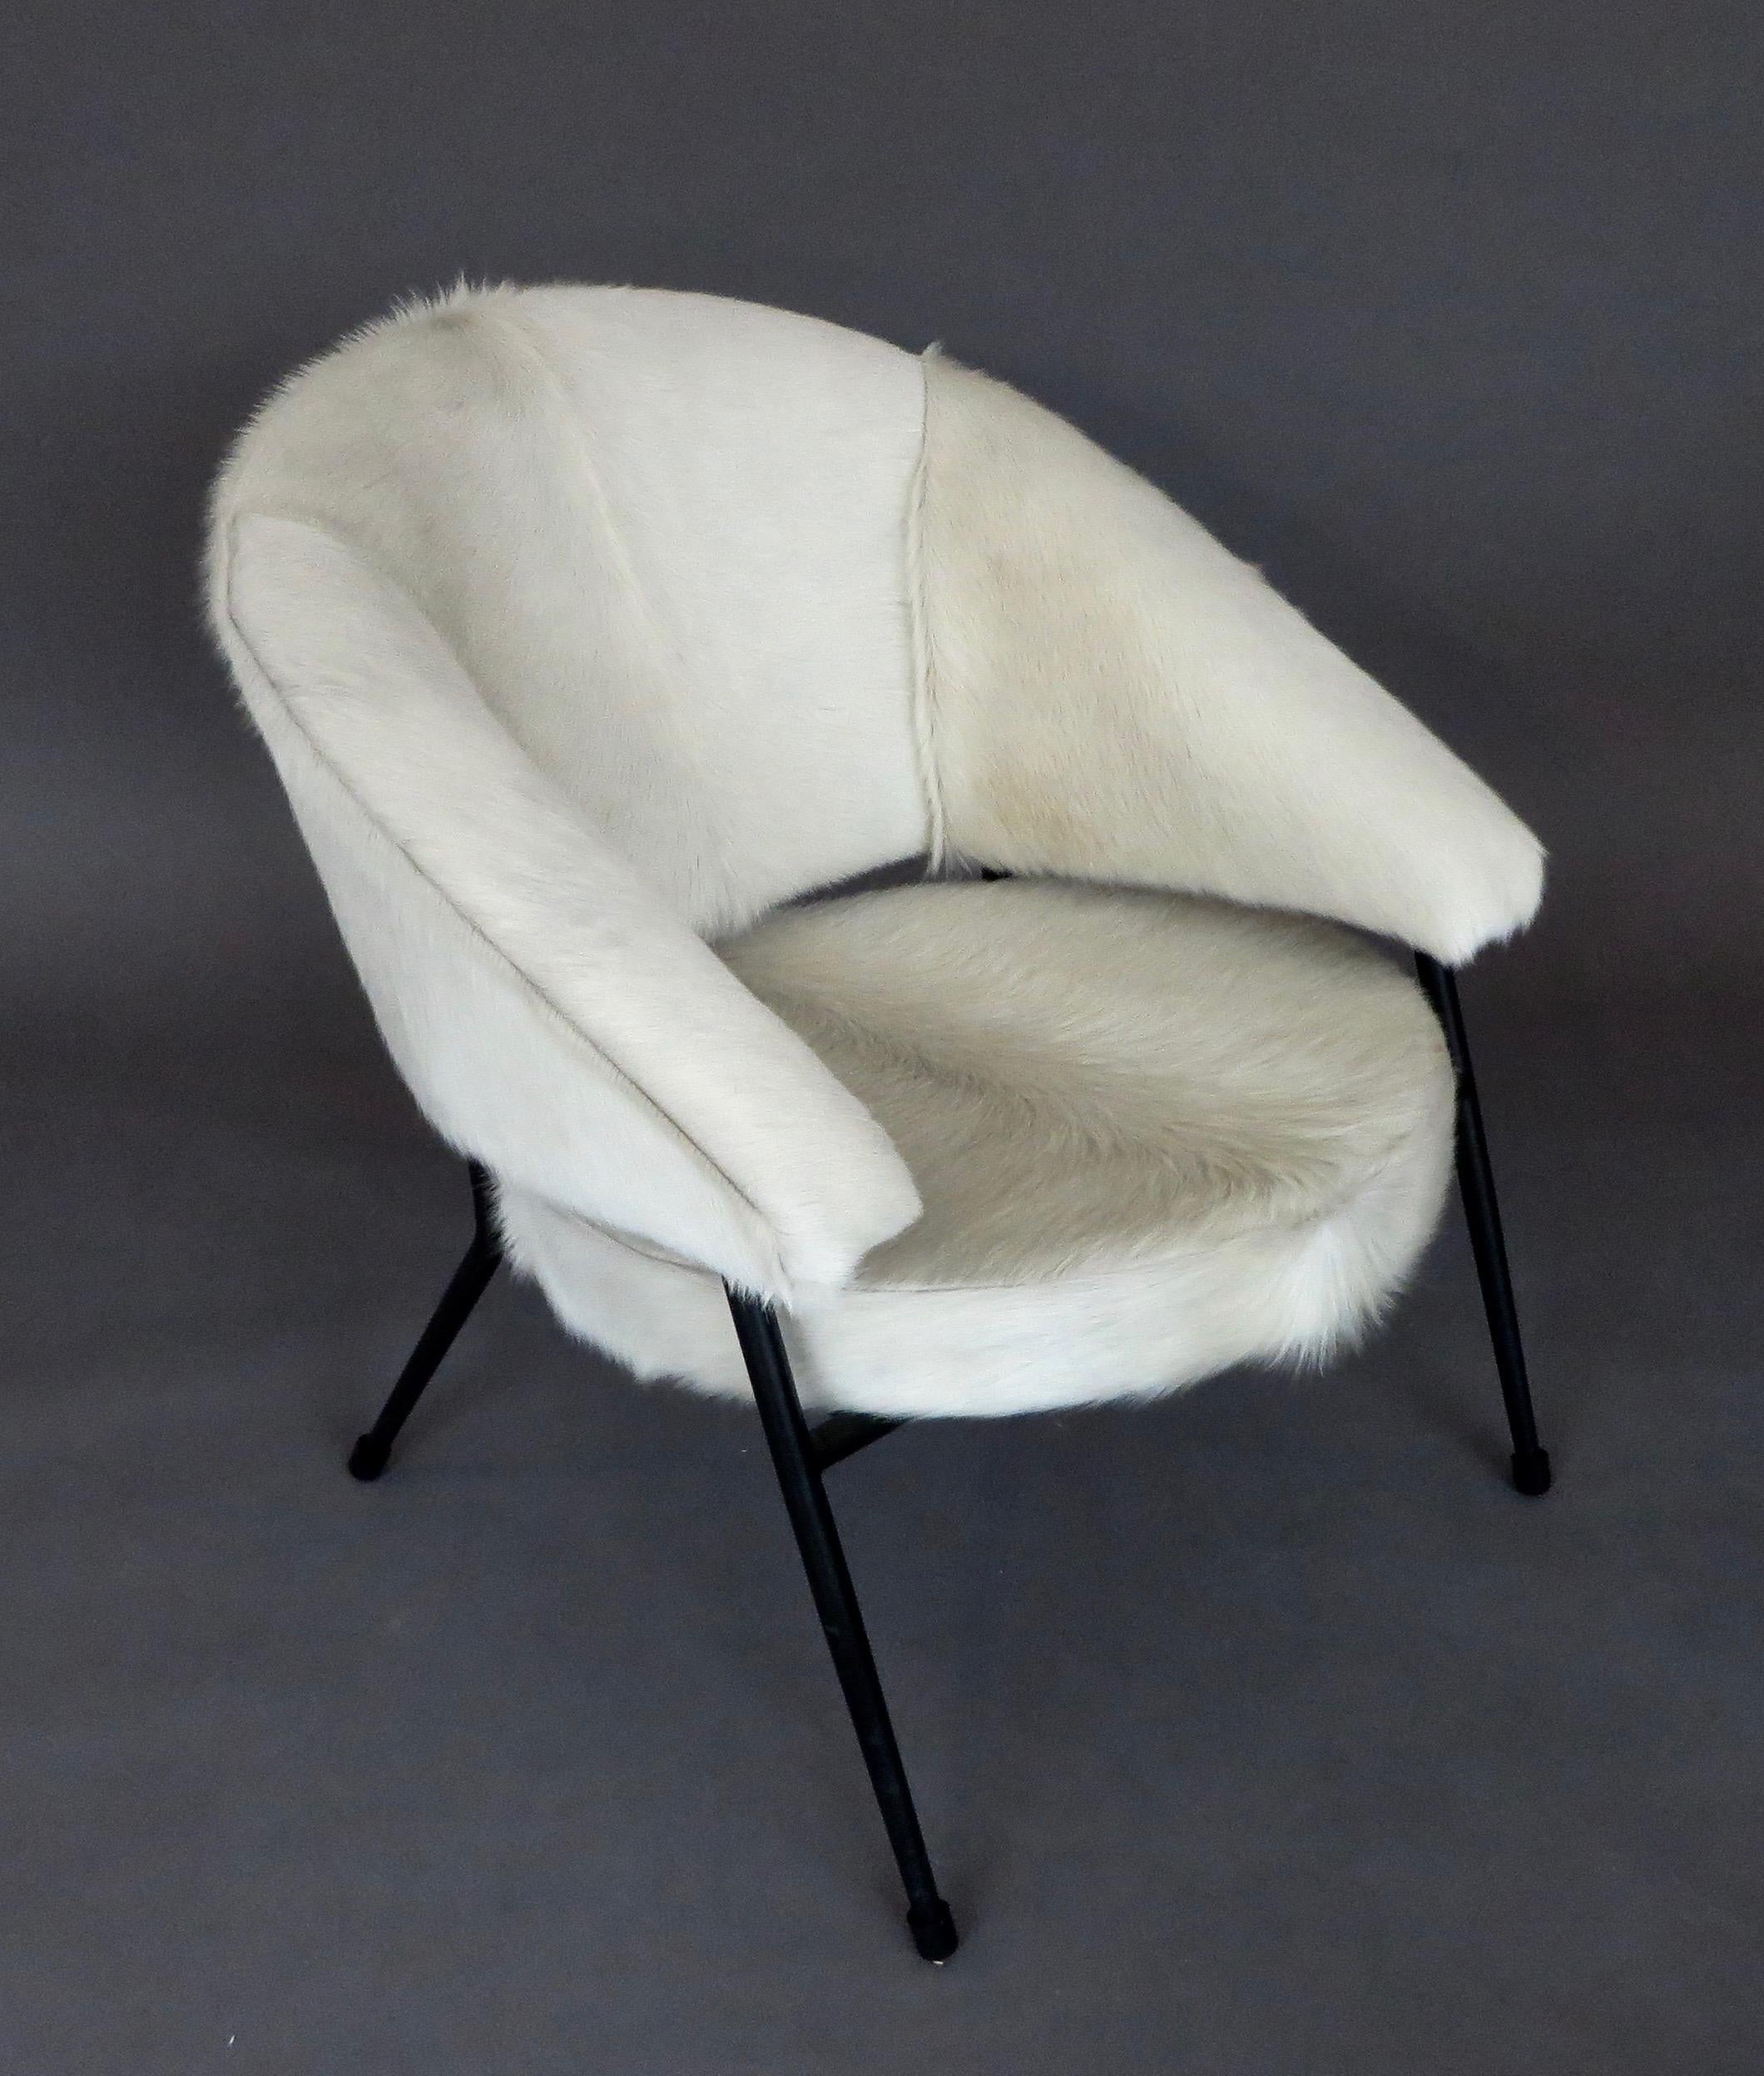 French curved back with nice splayed legs all black iron frame single lounge chair.
The chair has been reupholstered in a white hair on hide back and seat.
Overall size: 26